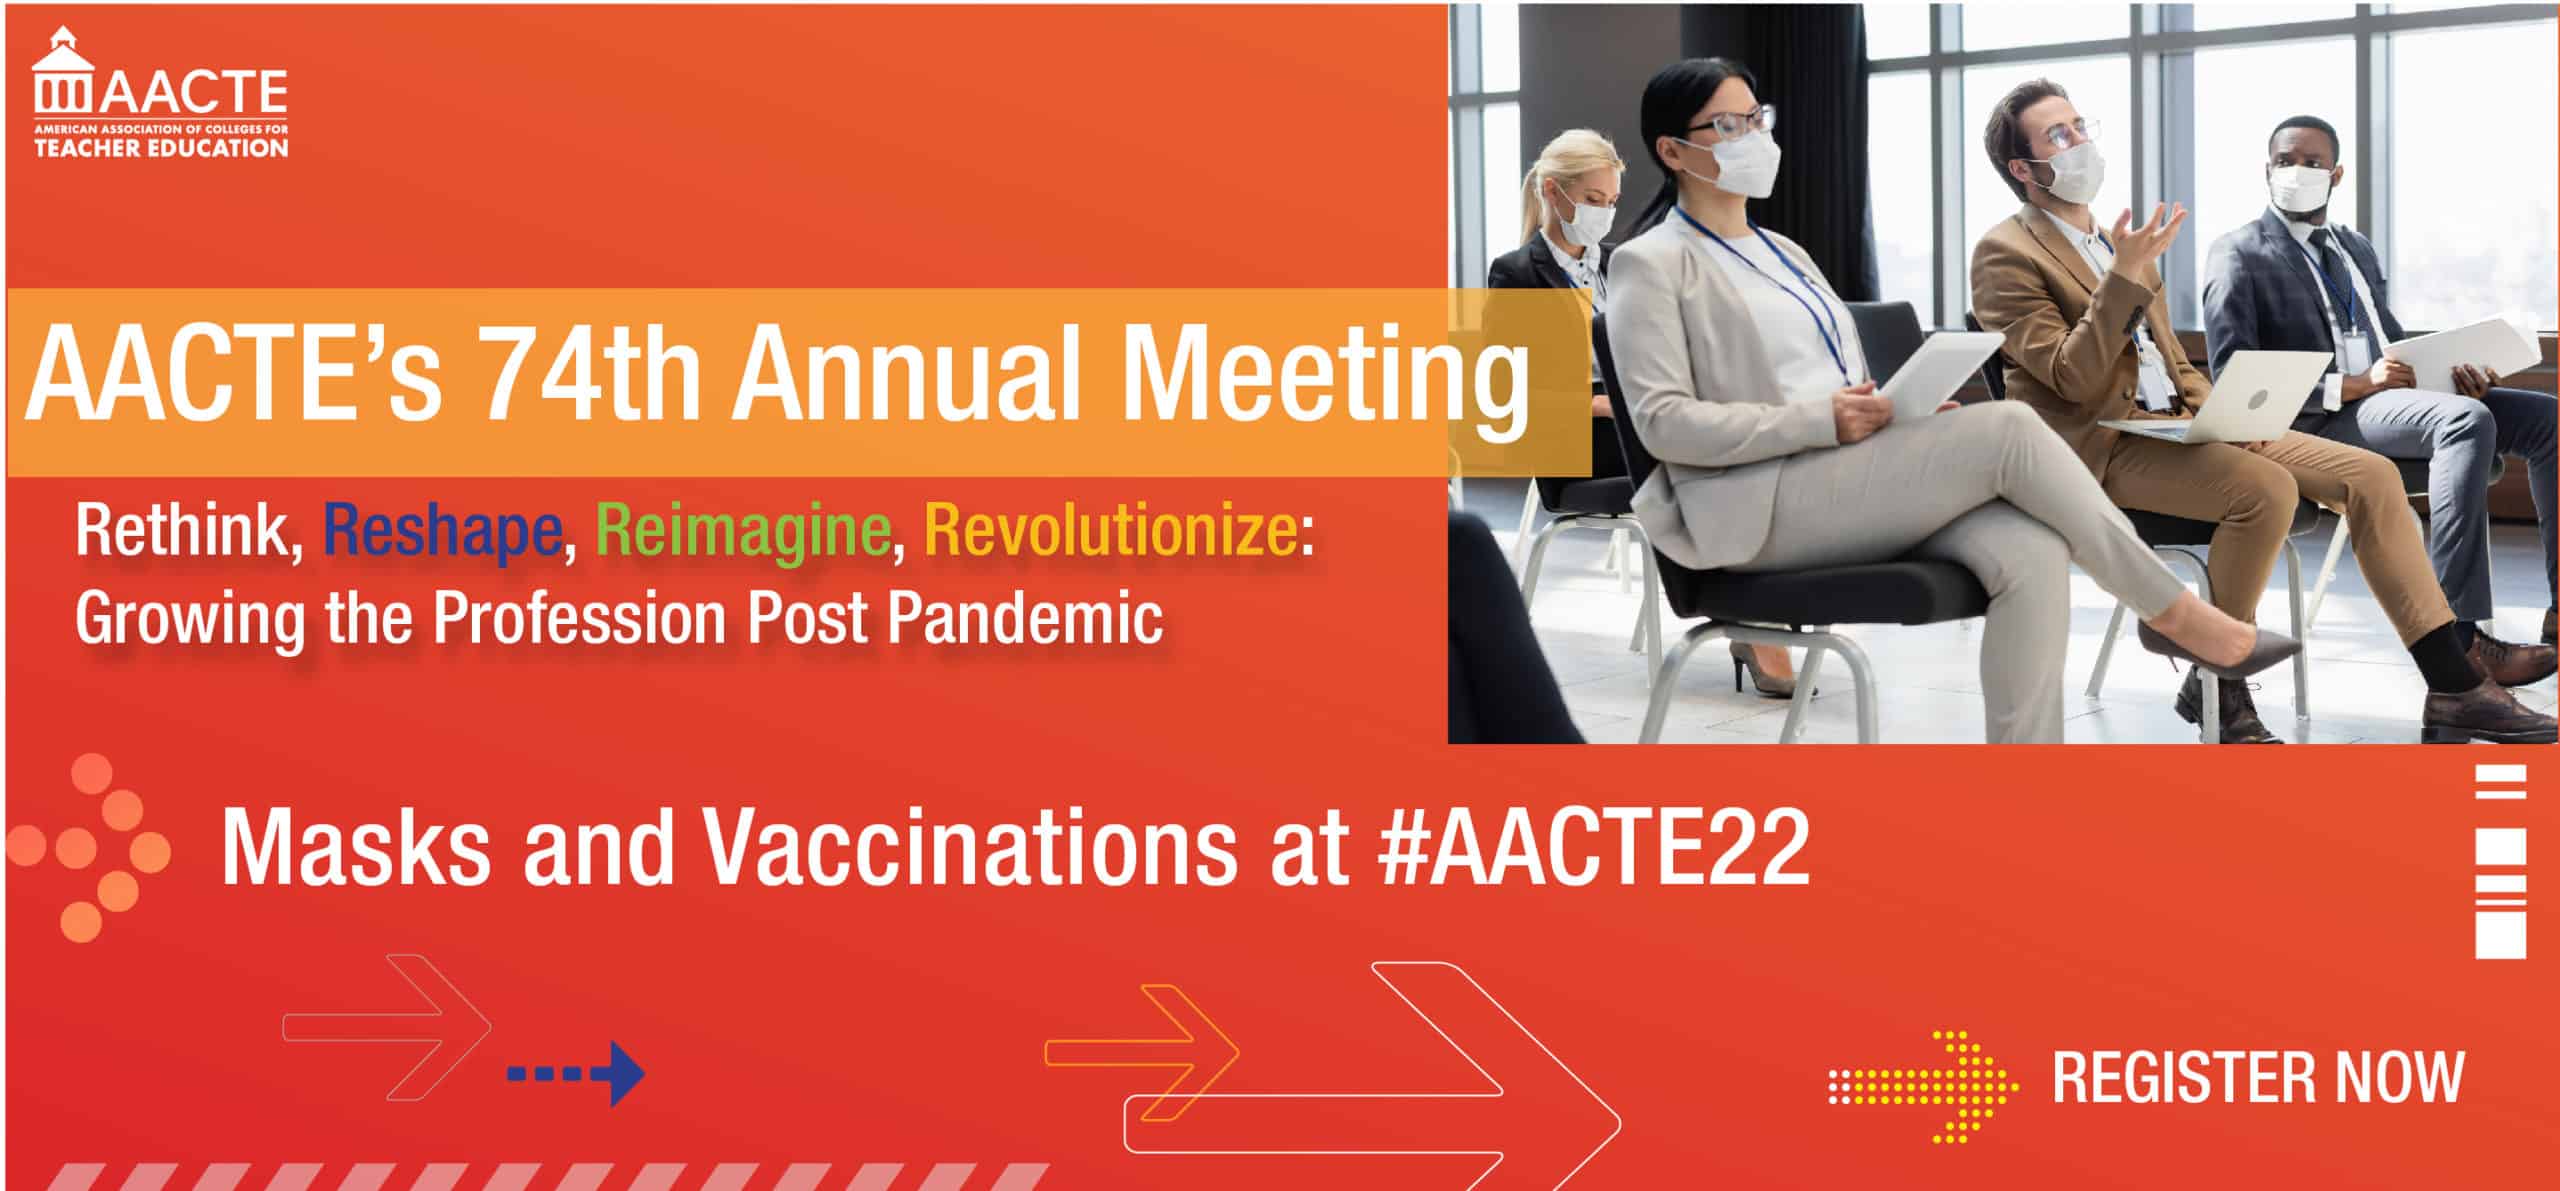 AACTE's 74th Annual Meeting - Masks and Vaccinations